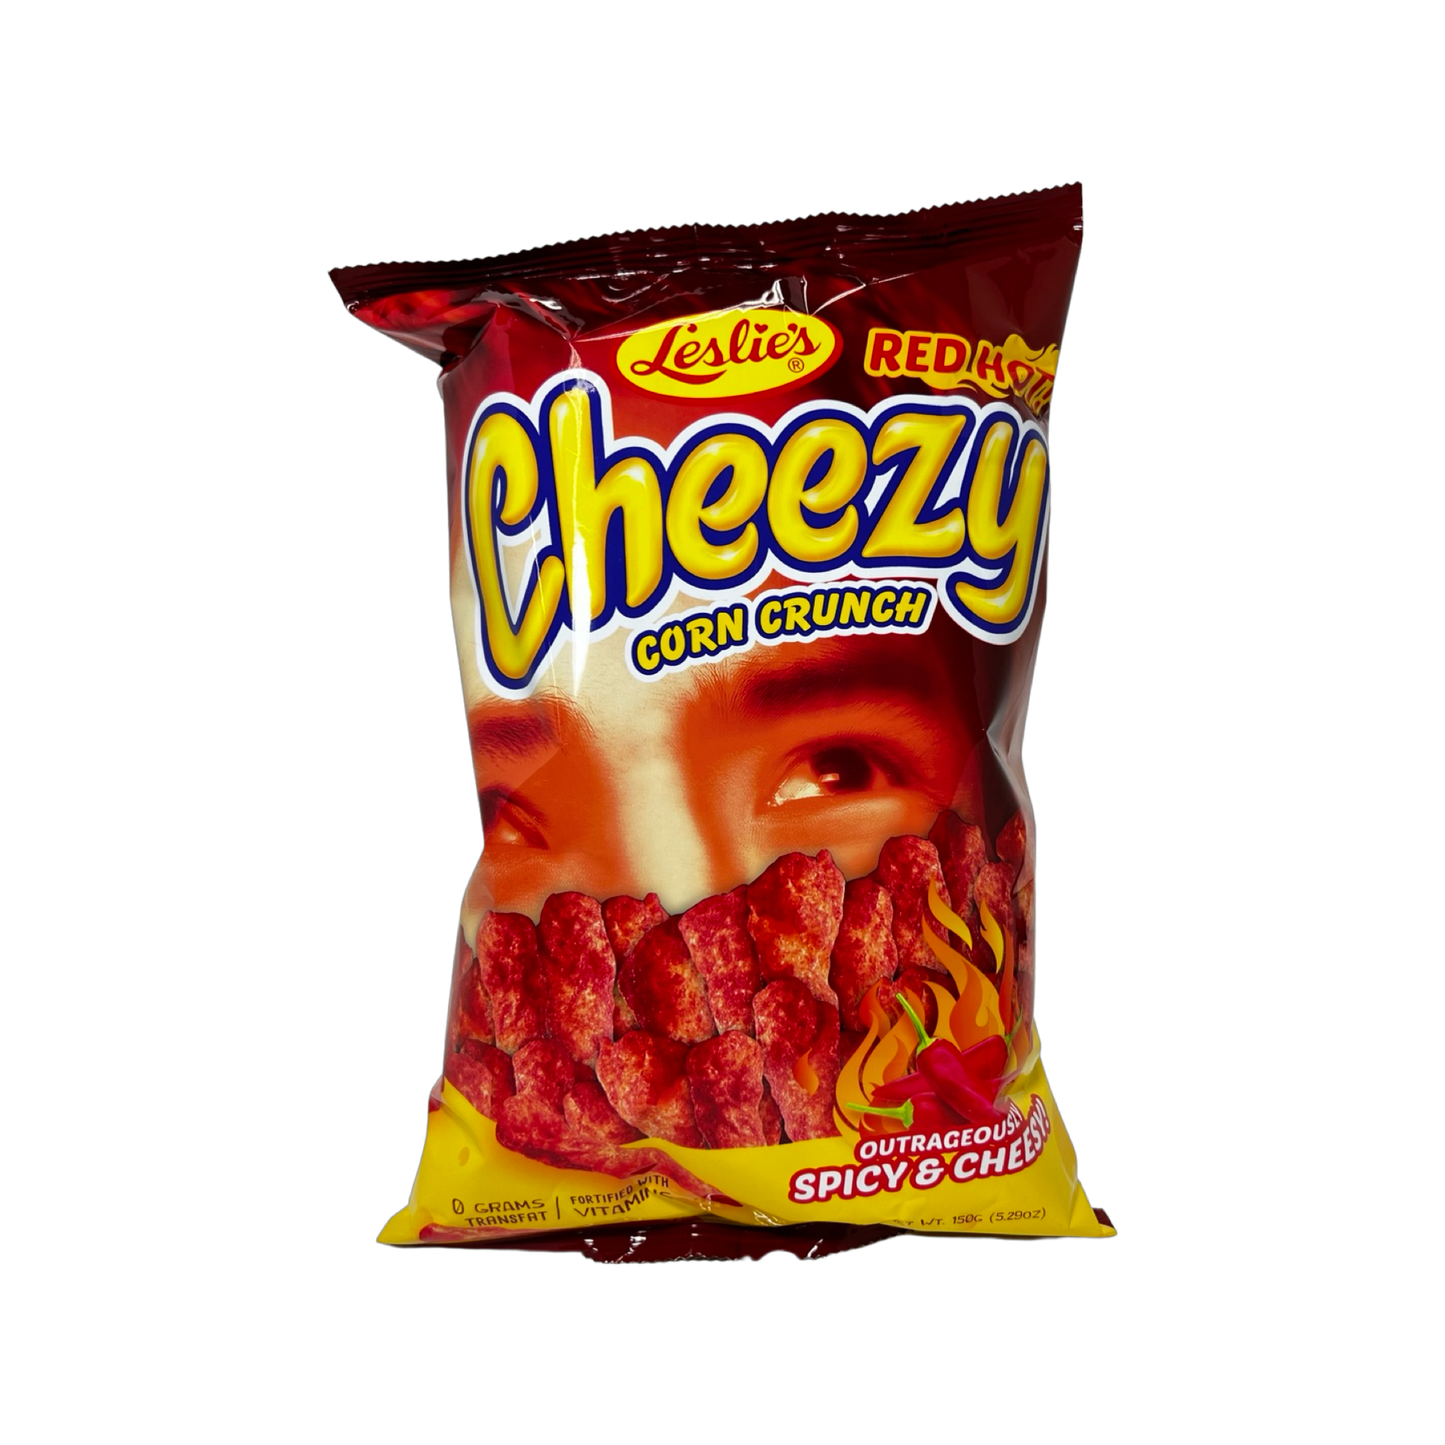 Leslie’s Cheezy Red Hot Corn Crunch 150g